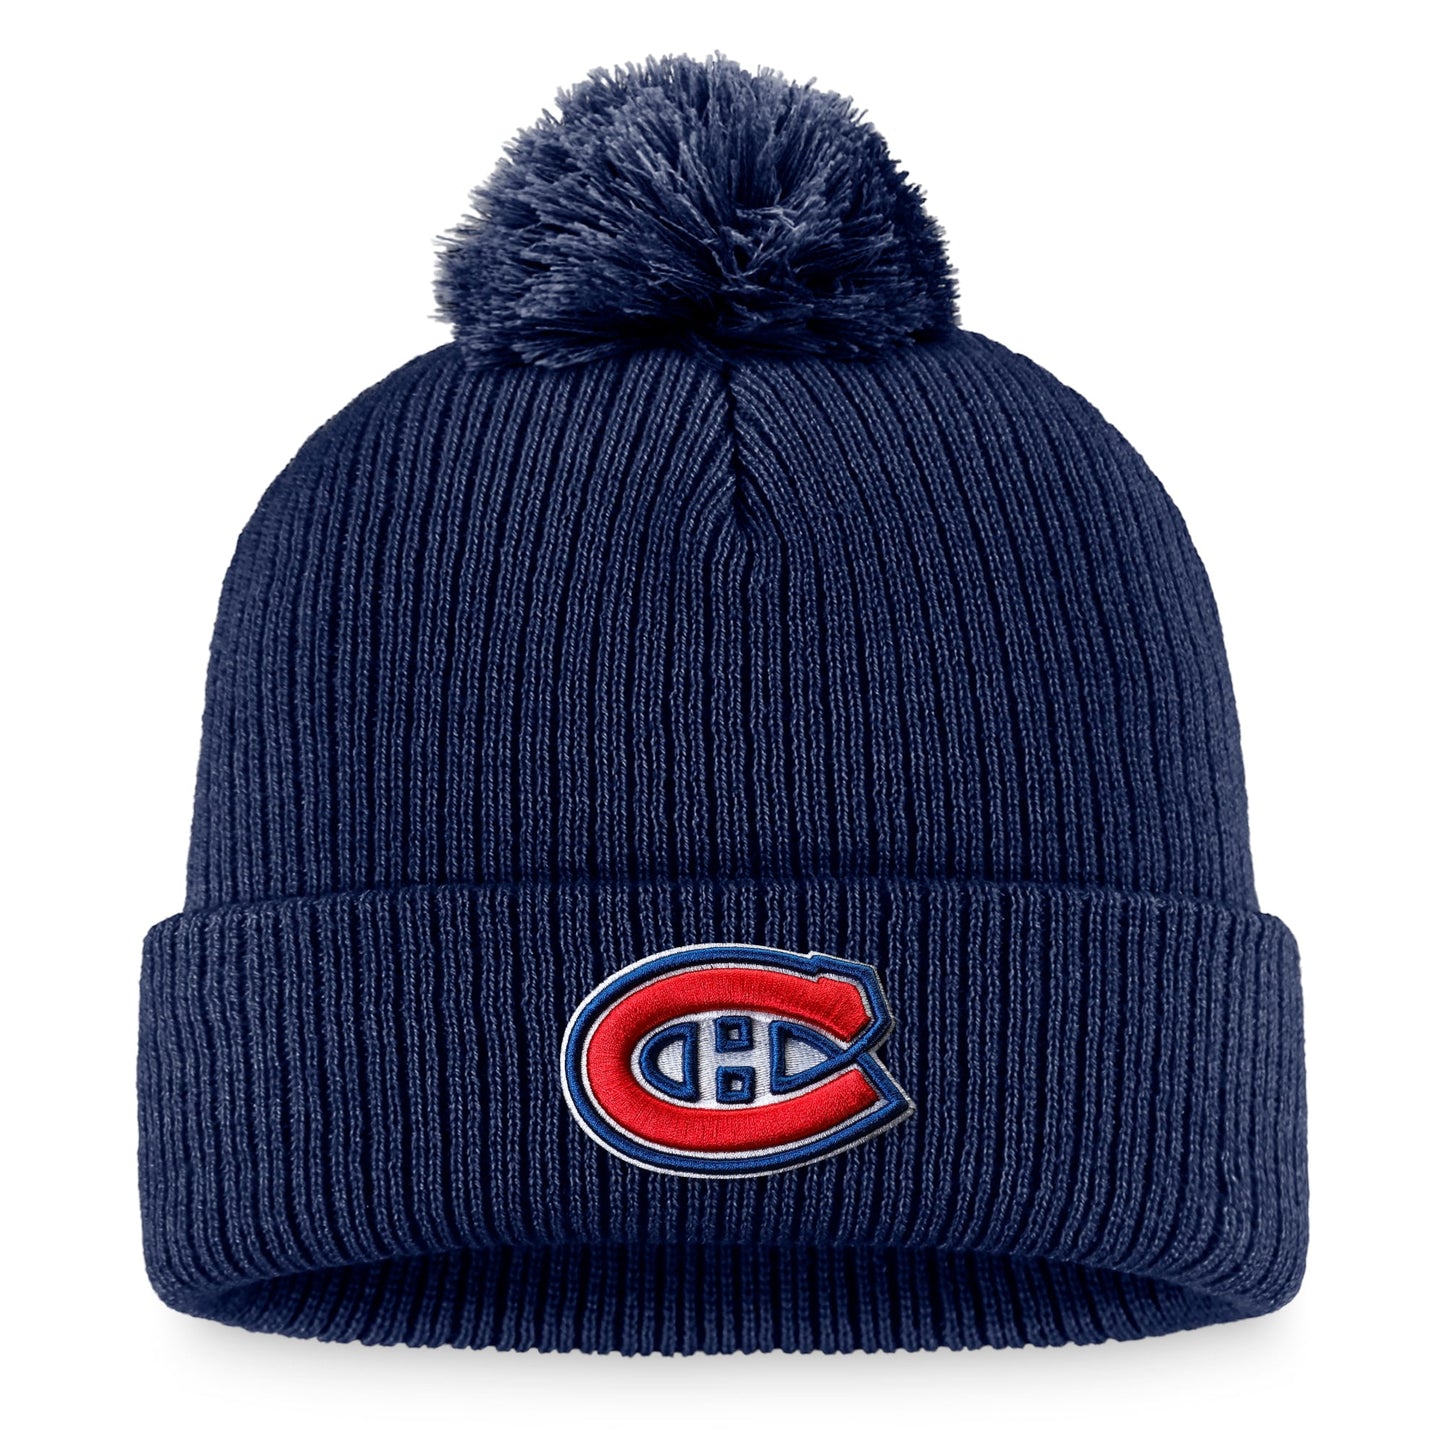 Men's Fanatics Branded Navy Montreal Canadiens Core Primary Logo Cuffed Knit Hat with Pom - OSFA